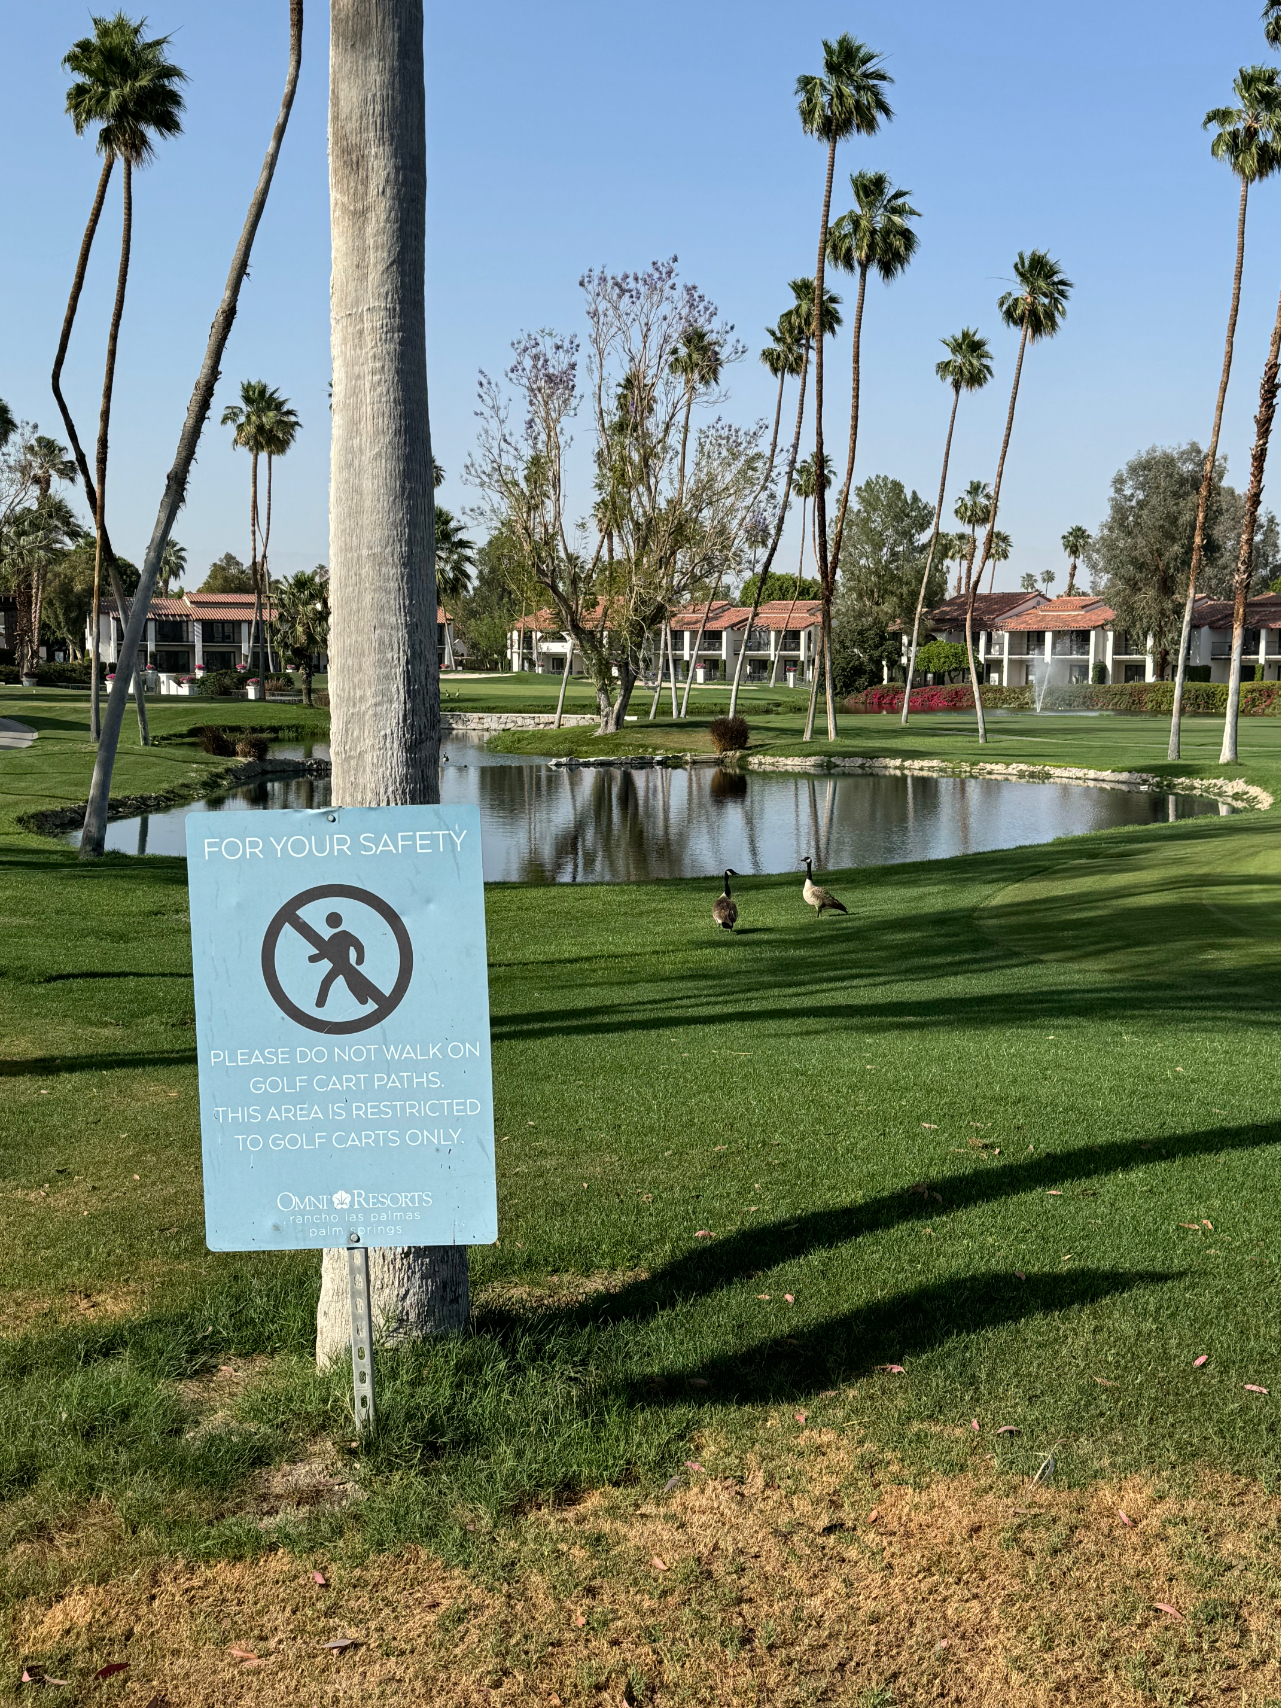 Sign warning not to walk on grass, geese by a pond, palm trees, and golf course backdrop